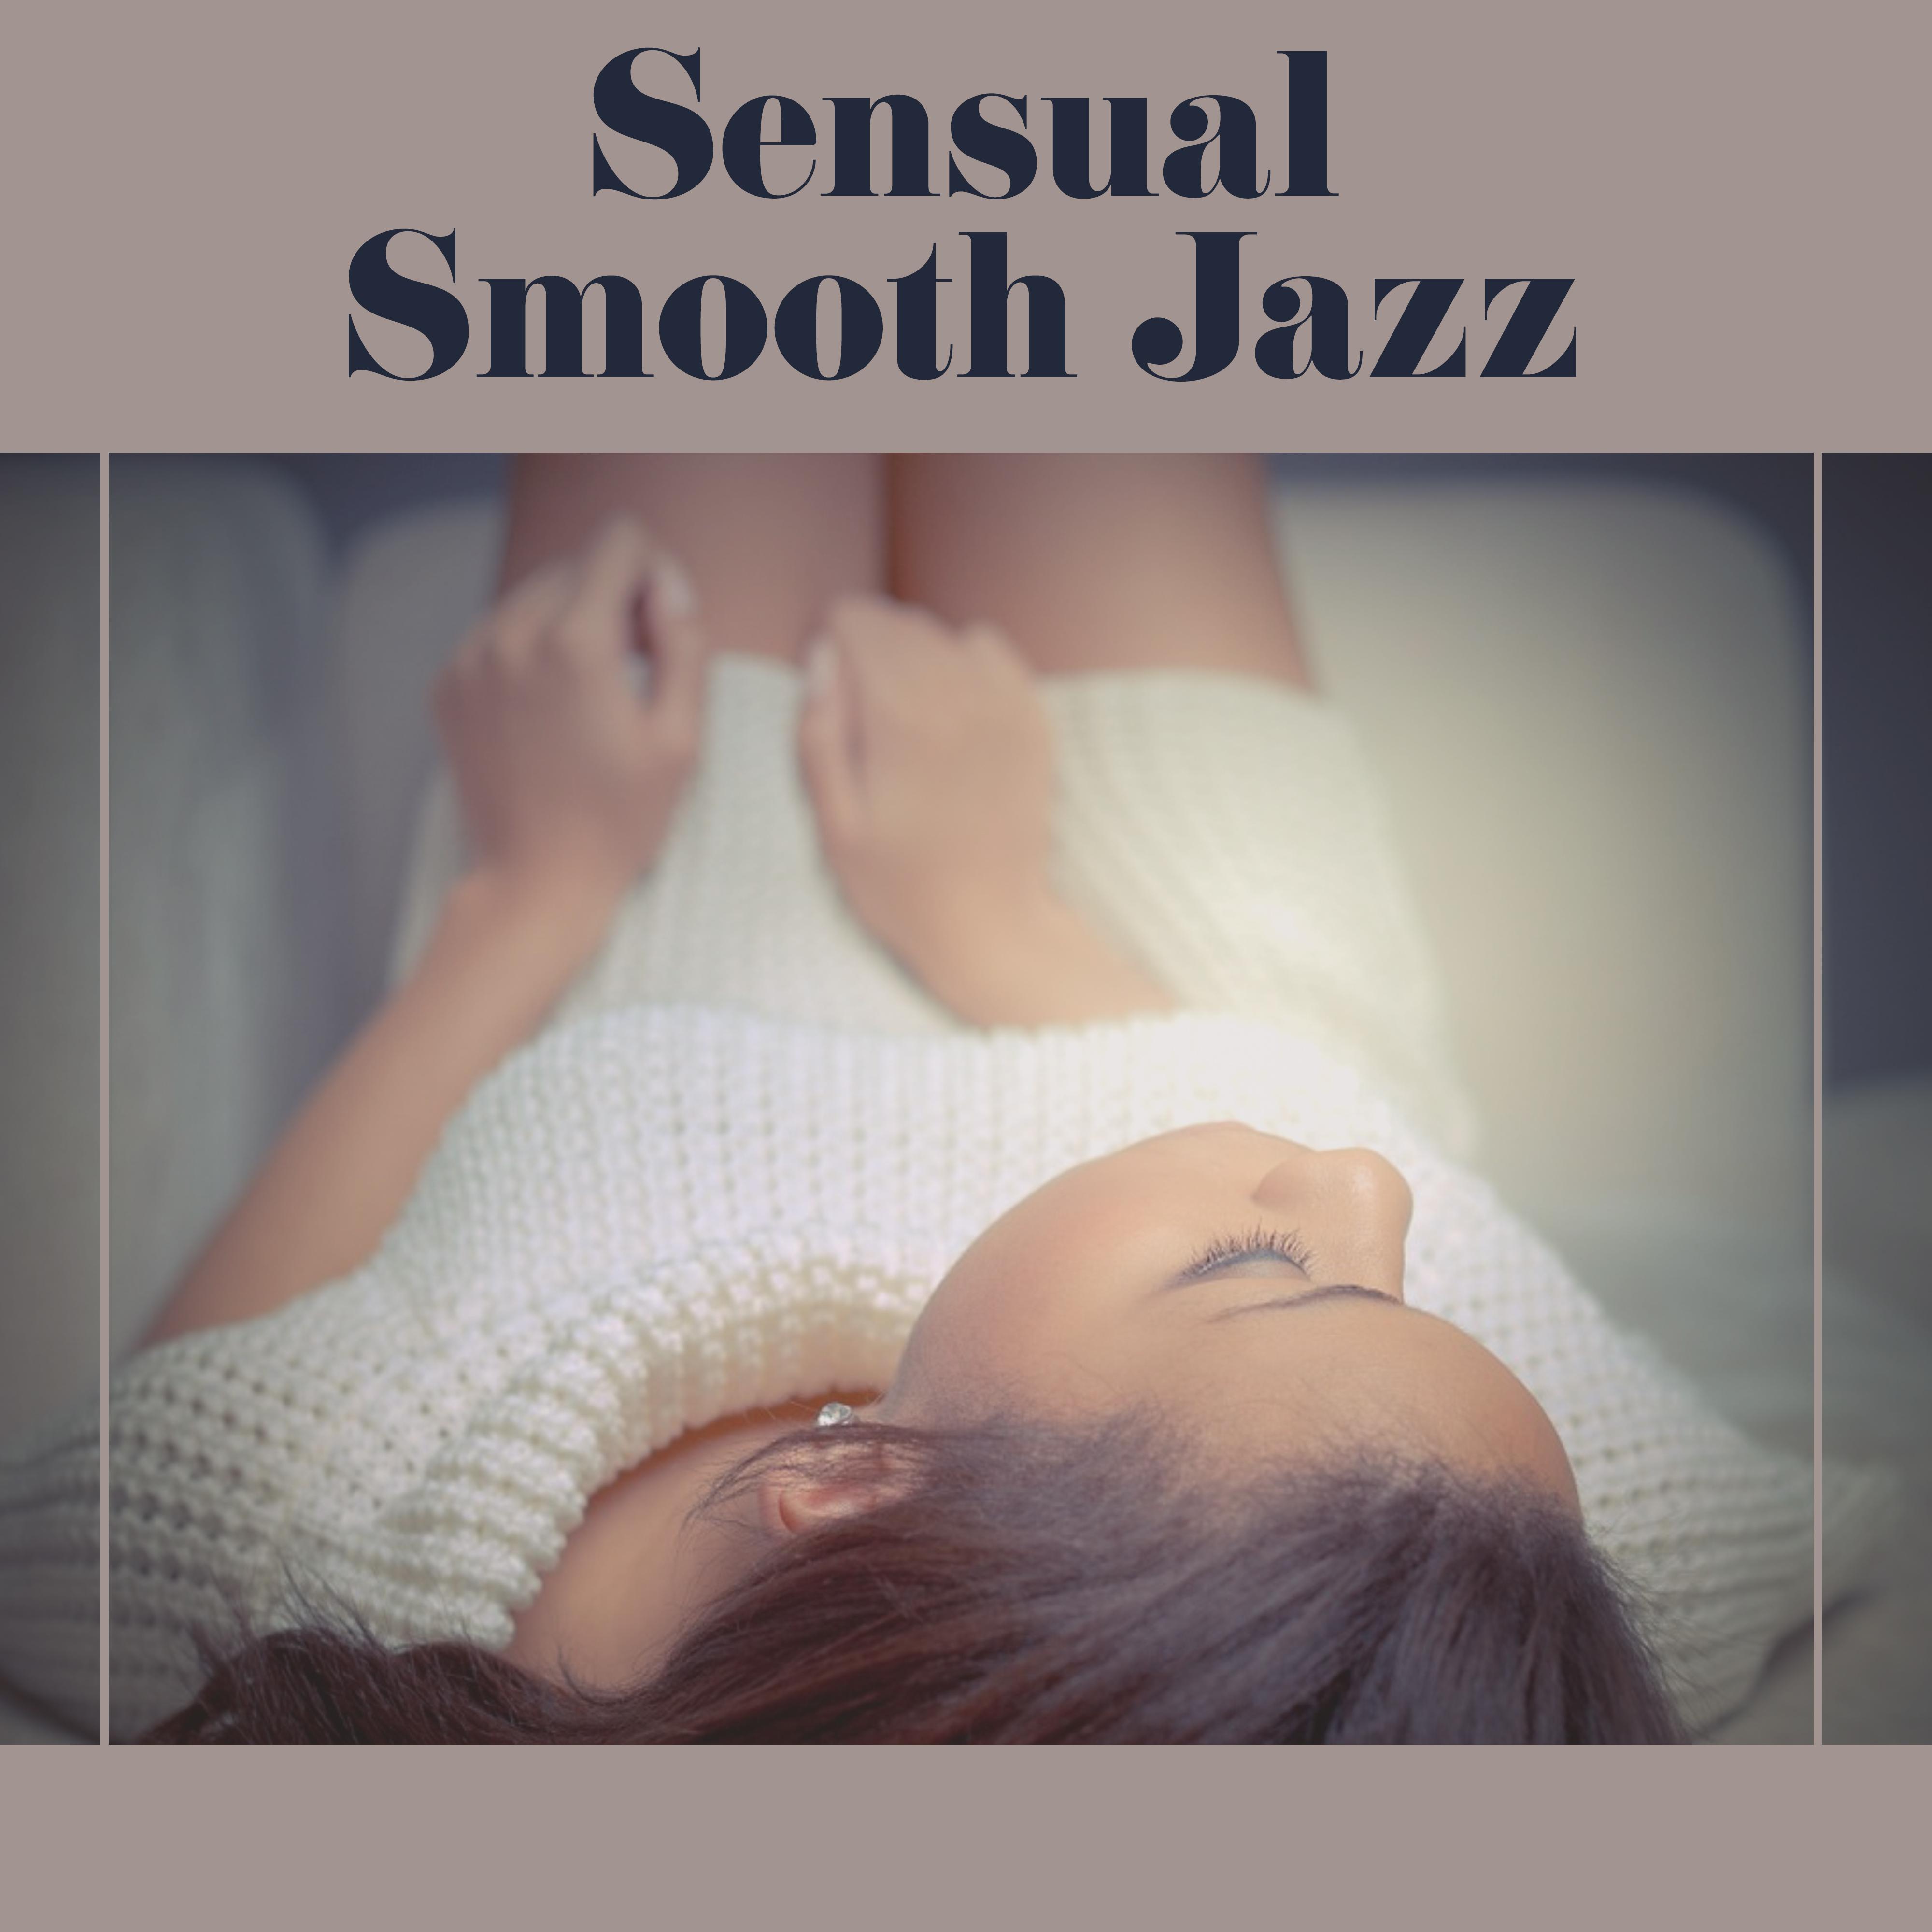 Sensual Smooth Jazz – Luxury Piano Music, Smooth Jazz Relaxation, Piano Ambient Music, Home Piano, Easy Listening Piano Music, Dinner Music